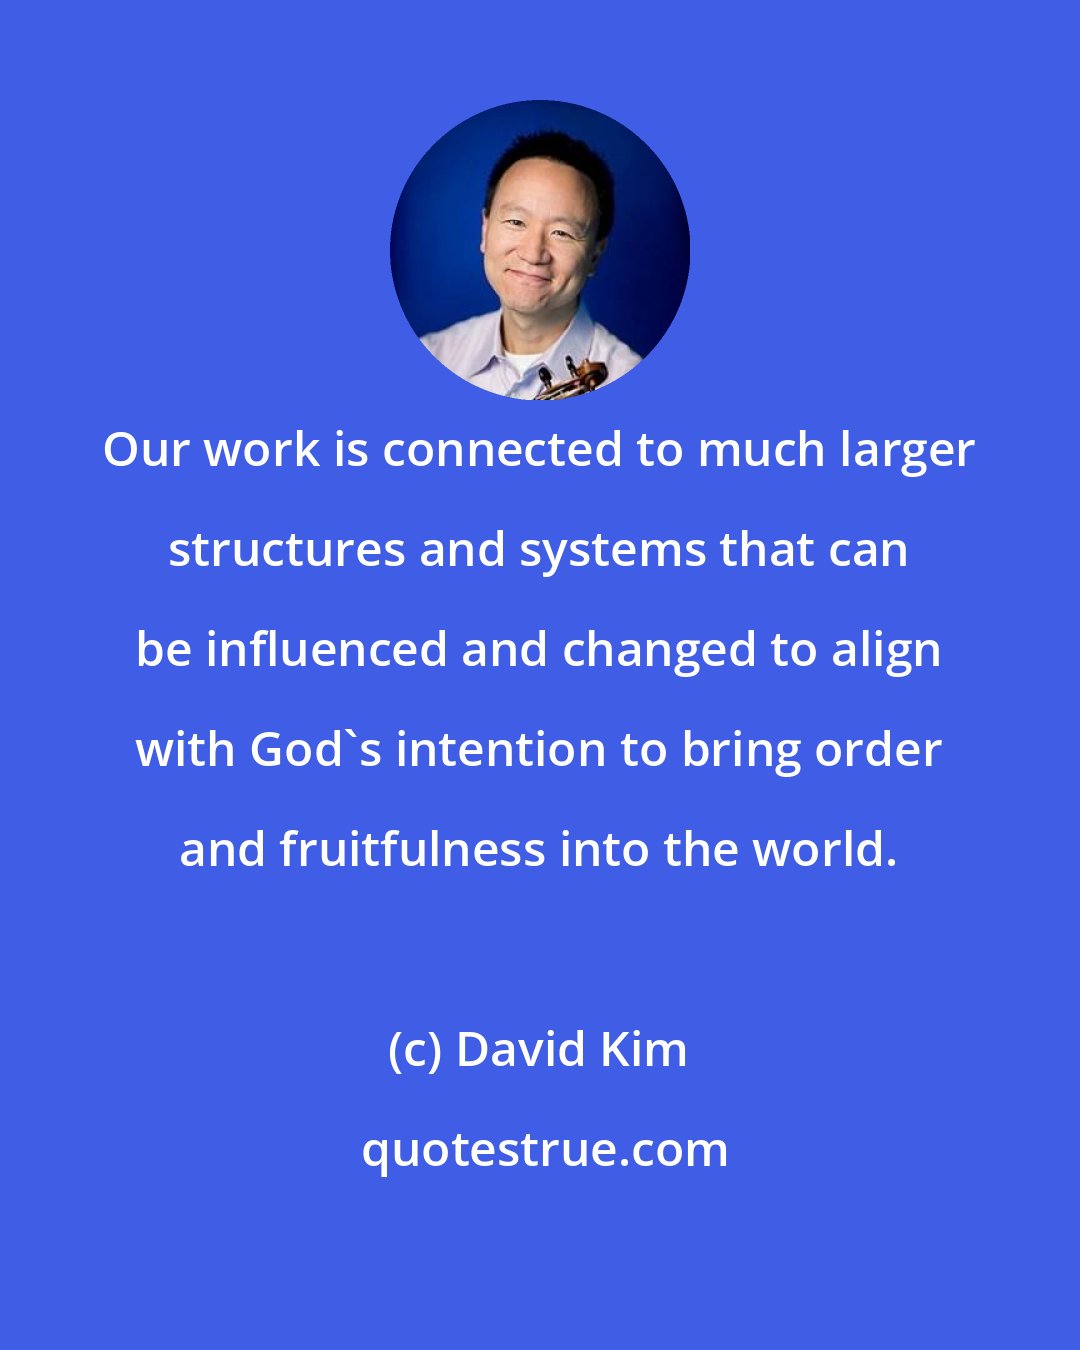 David Kim: Our work is connected to much larger structures and systems that can be influenced and changed to align with God's intention to bring order and fruitfulness into the world.